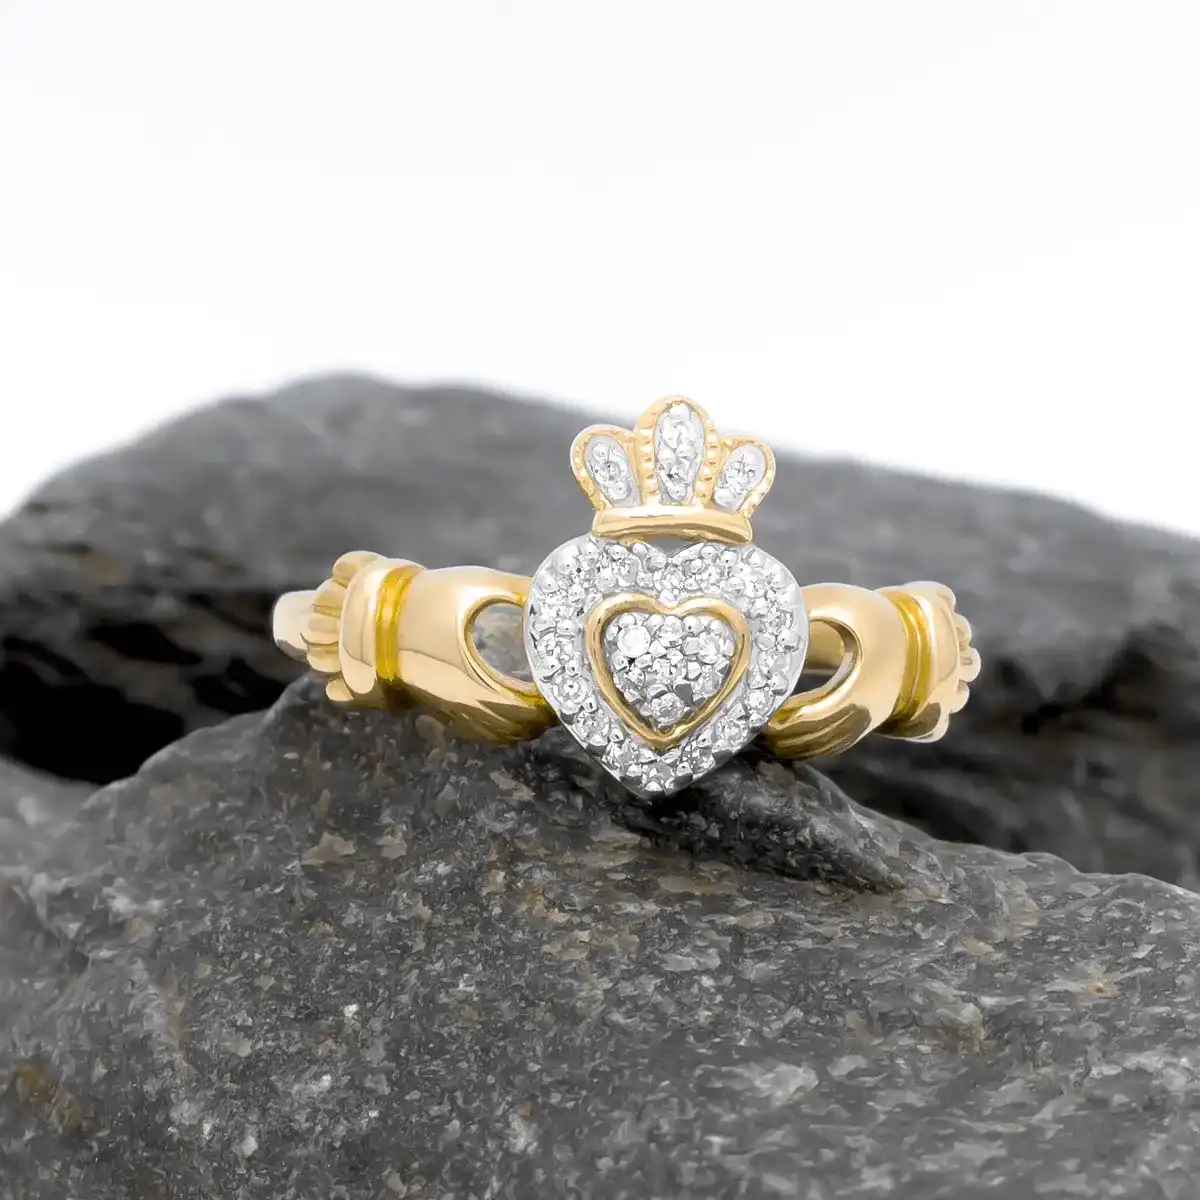 Outstanding Yellow Gold And Diamond Claddagh Ring ...